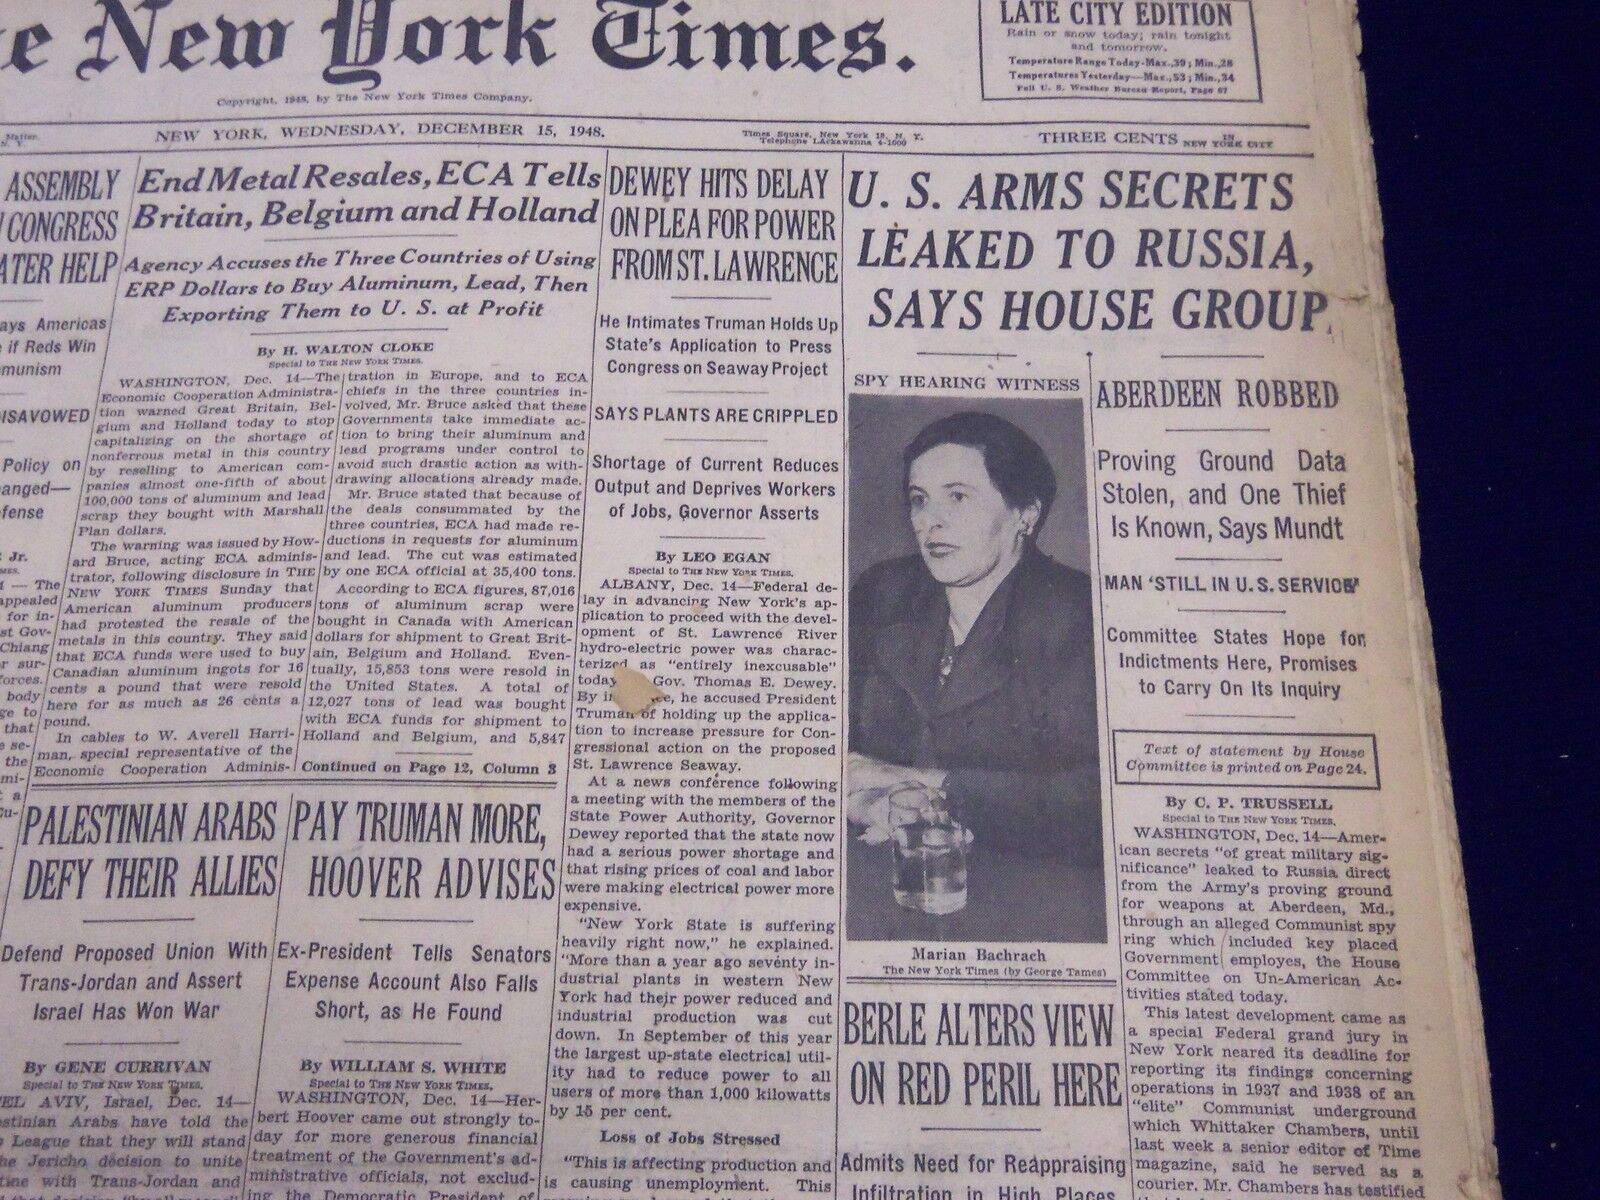 1948 DEC 15 NEW YORK TIMES - U. S. ARMS SECRETS LEAKED TO RUSSIA - NT 130